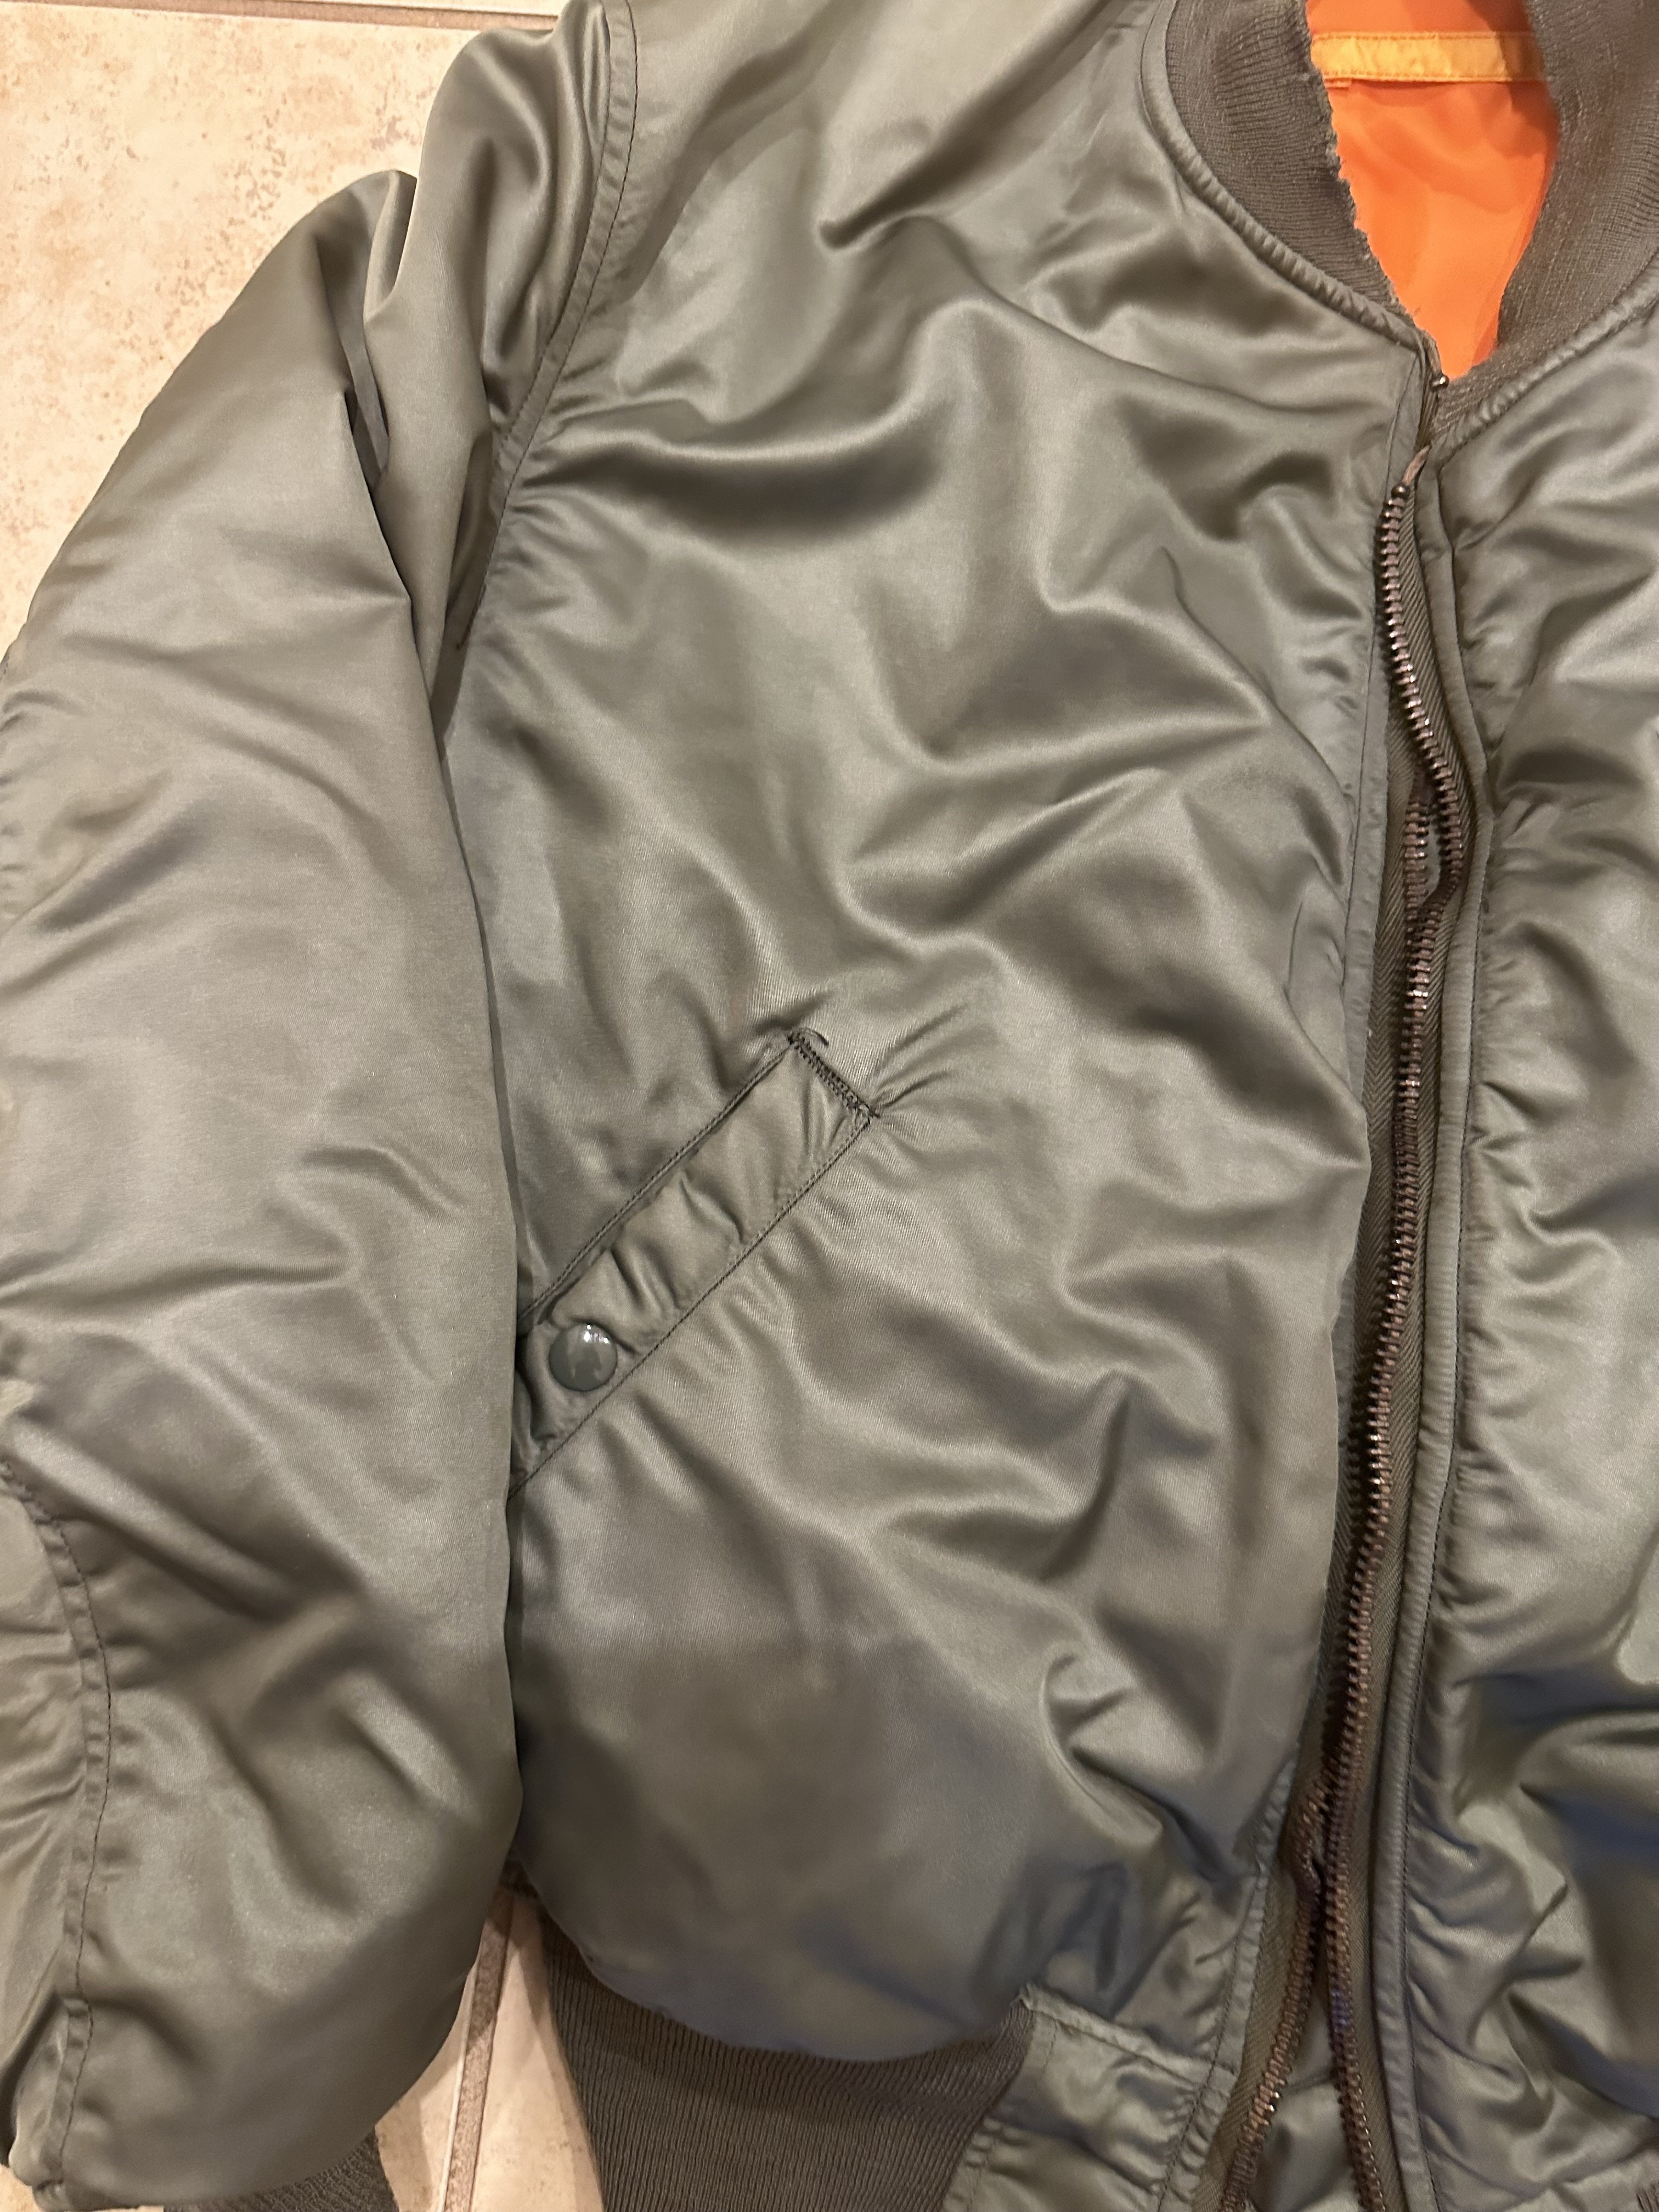 In defence of Alpha Industries. | Page 2 | Vintage Leather Jackets Forum